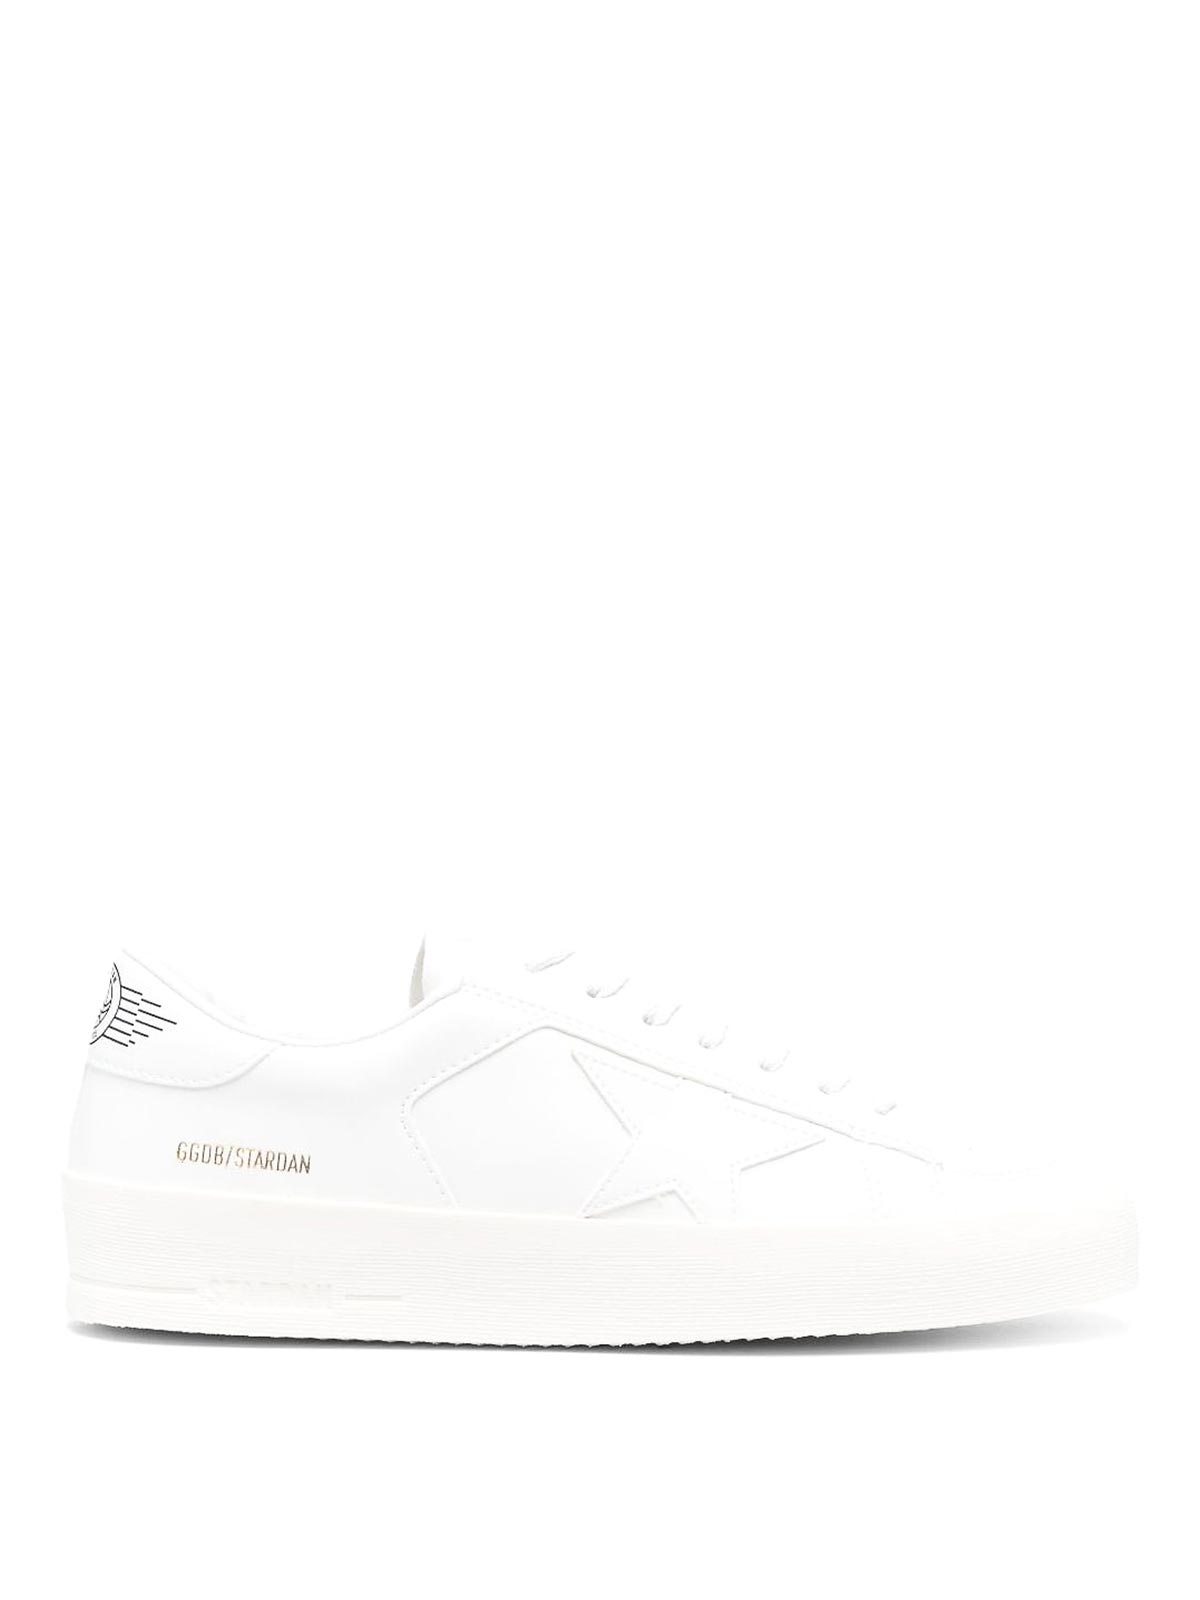 Golden Goose Stardan Leather Sneakers In White